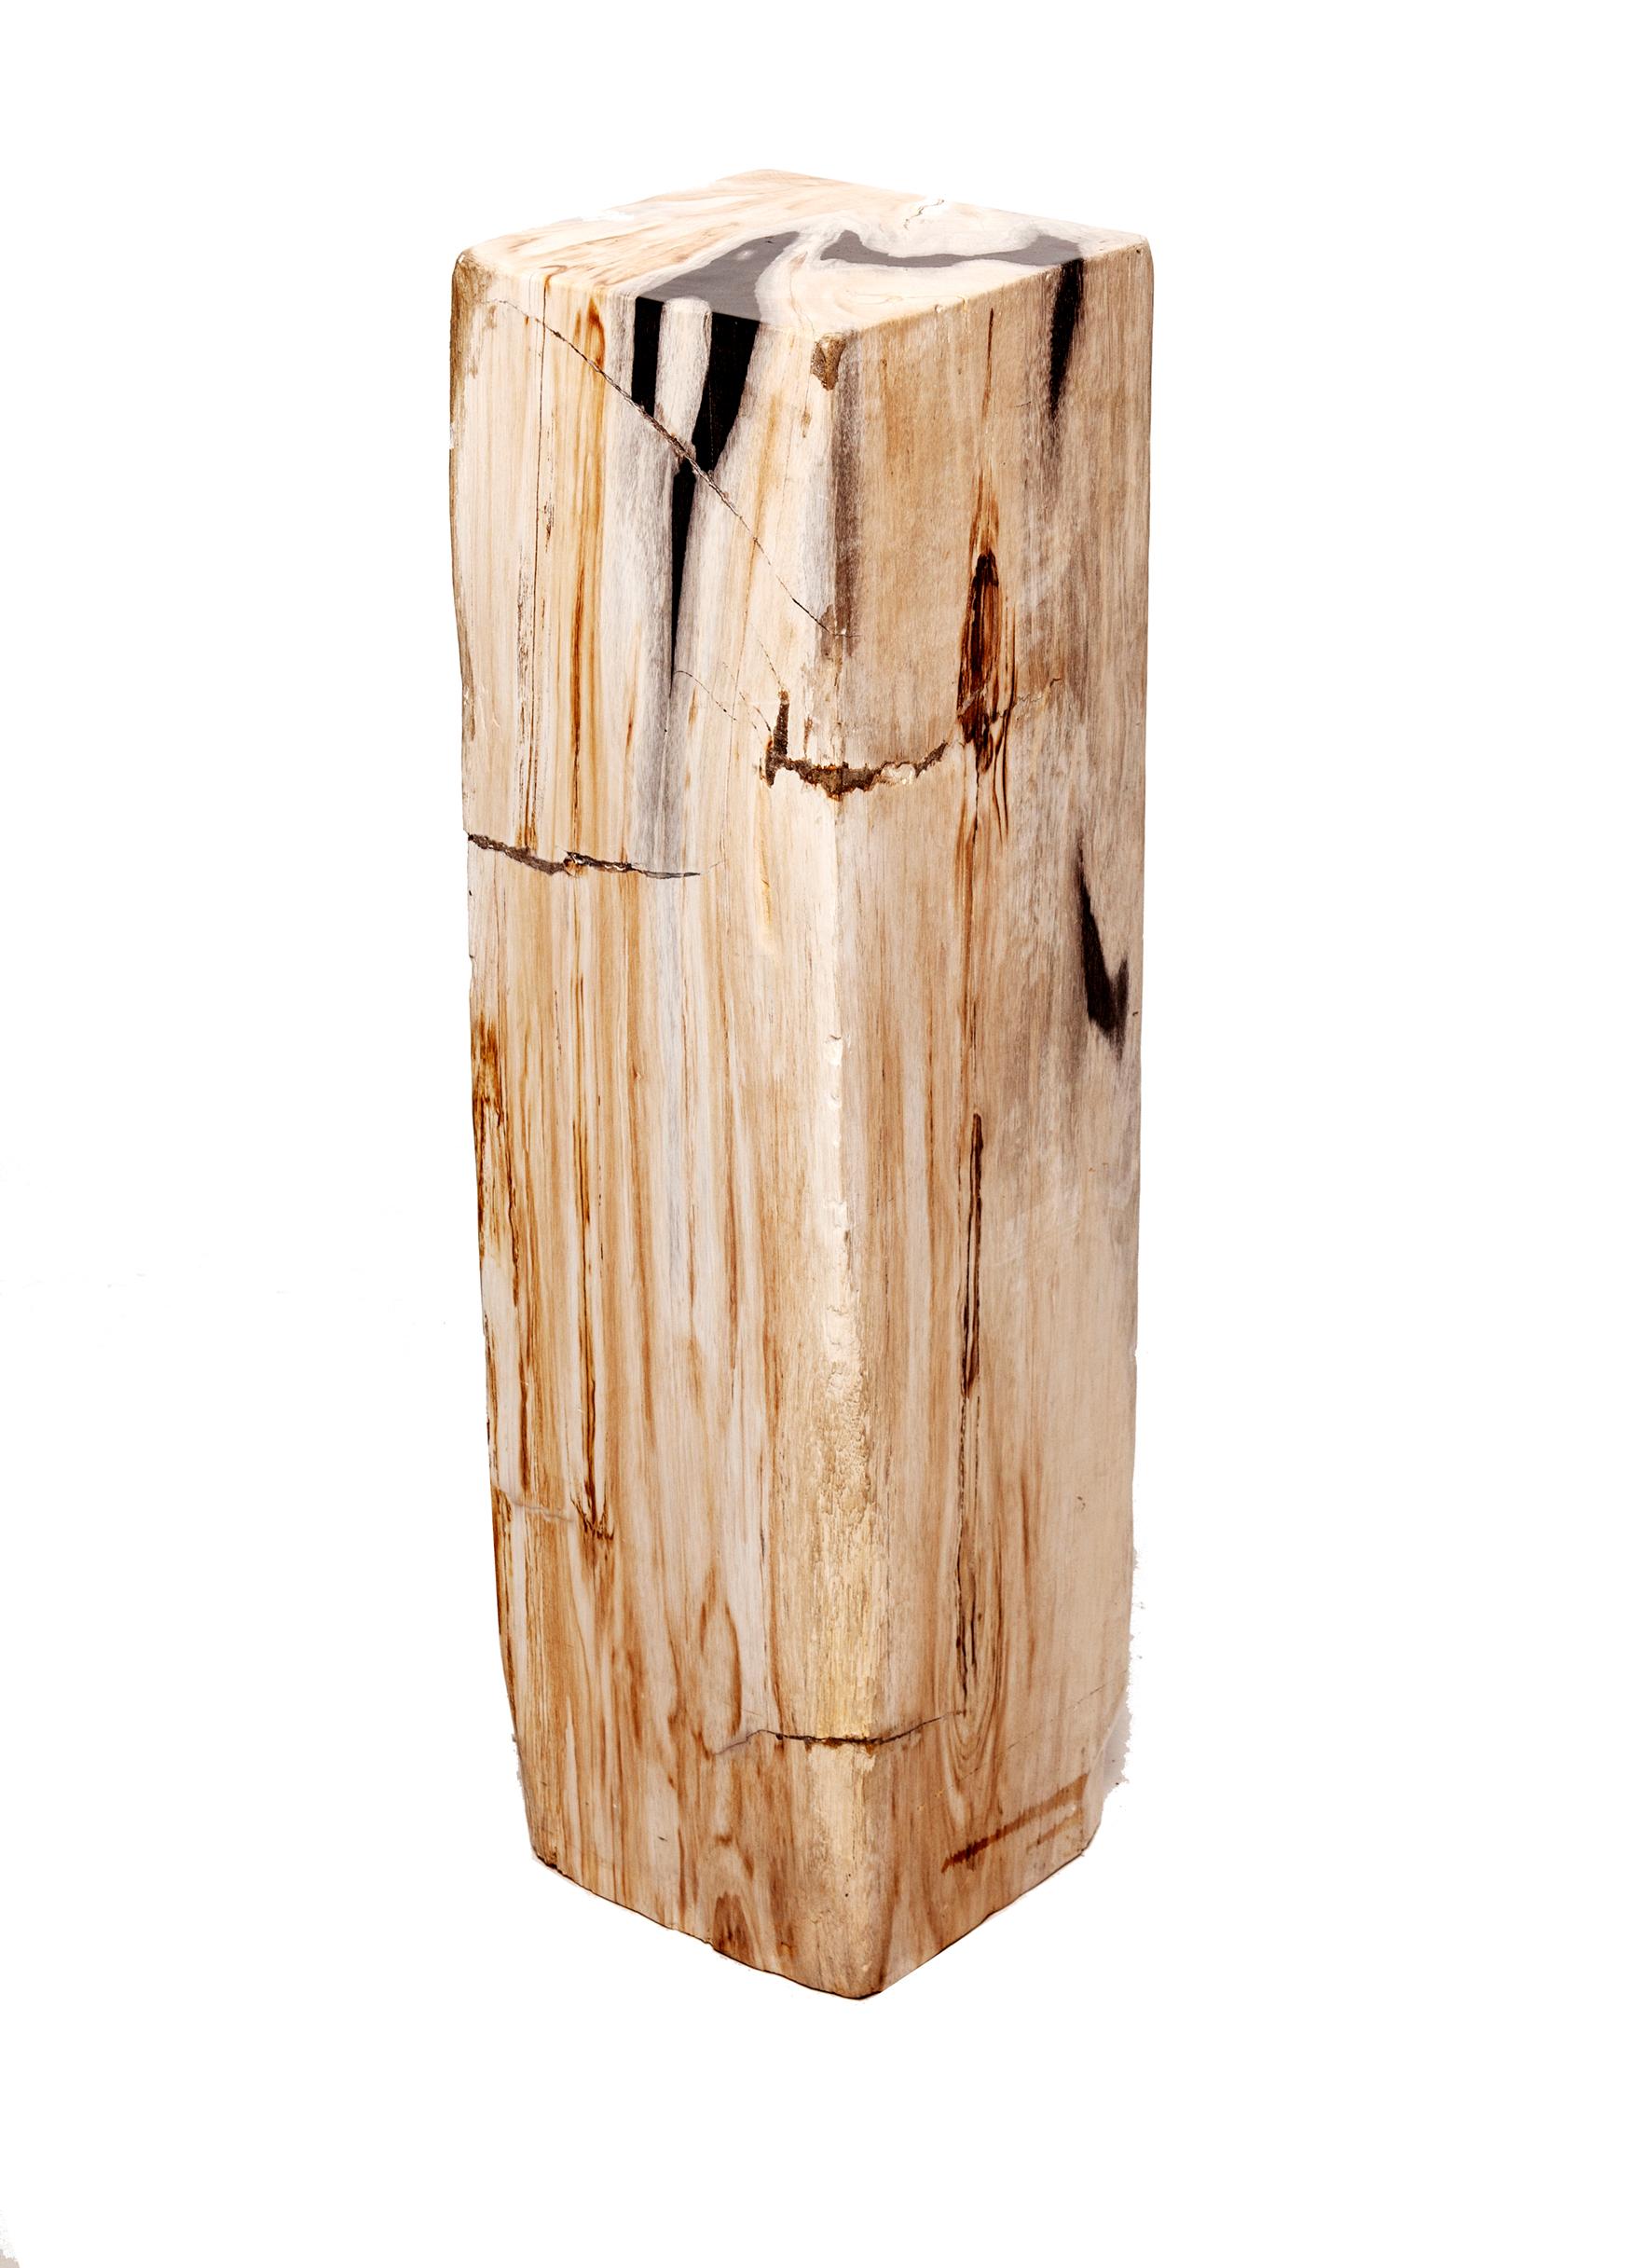 Polished petrified wood pedestal in lovely shades of sienna, white and touches of black veining. 
A dramatic piece of art that nature has made and ready to display your important art work.
Solid and heavy it is 36